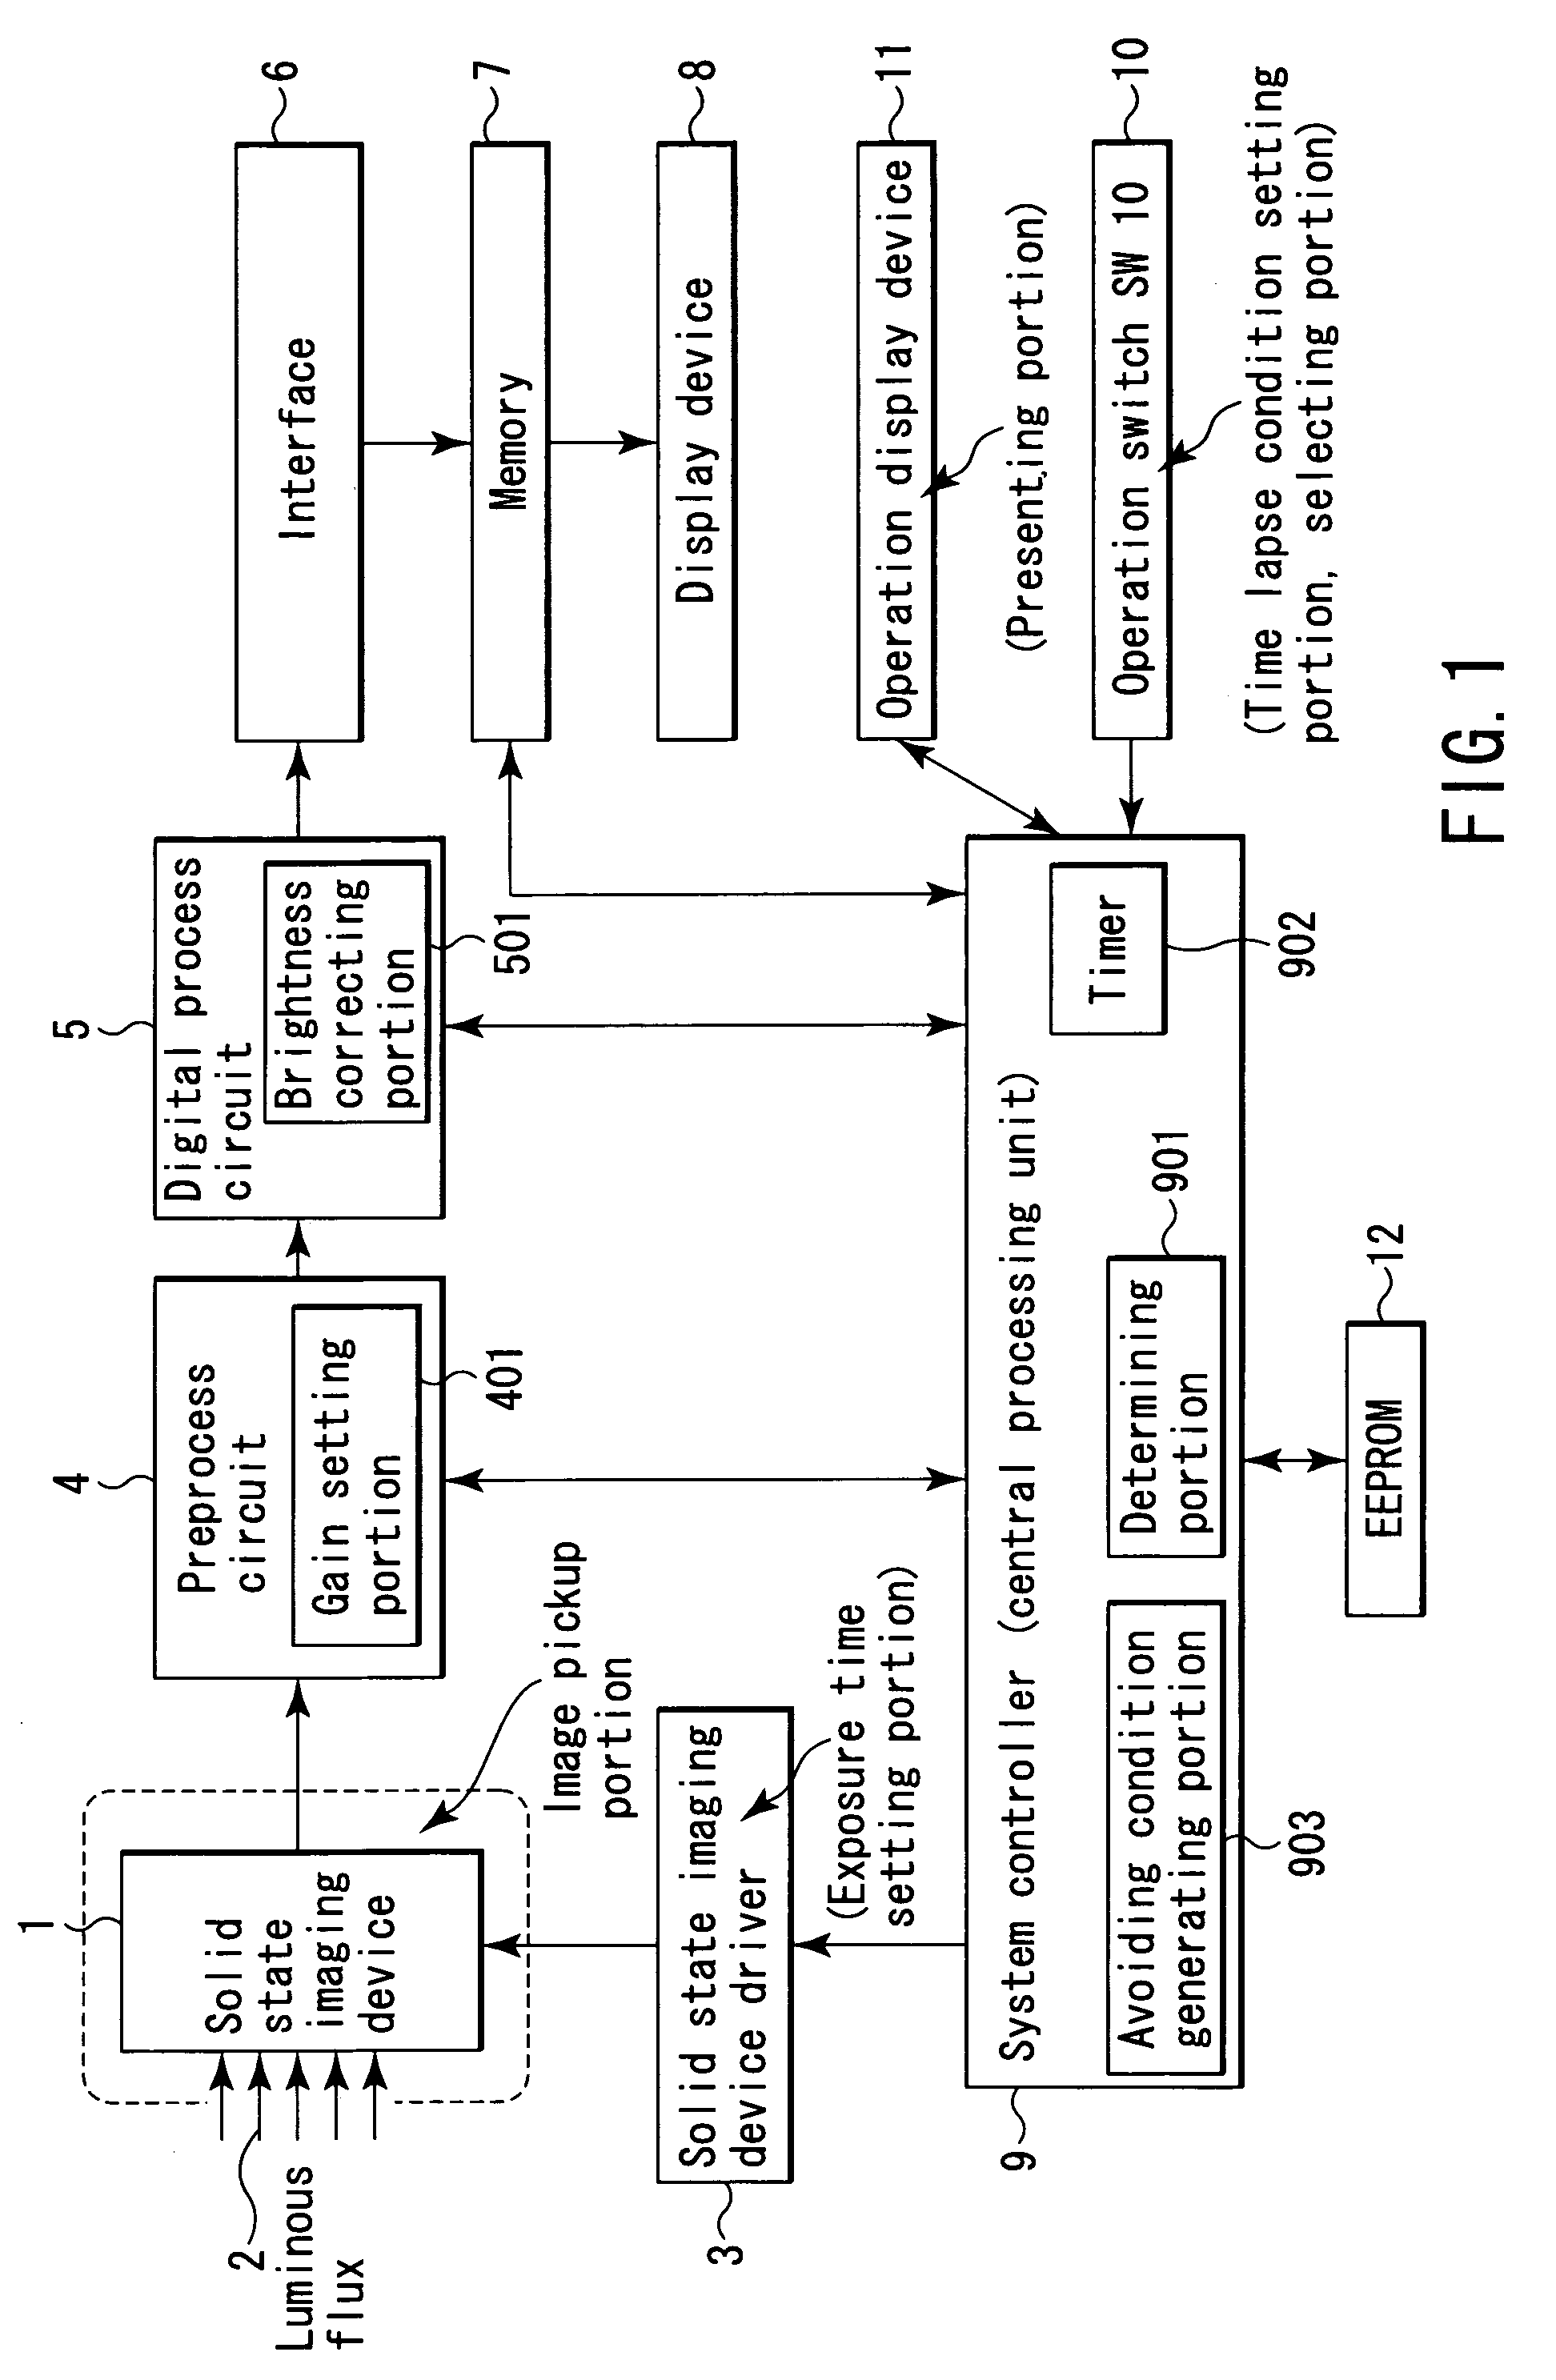 Image acquiring device and method capable of performing optimum time lapse imaging easily